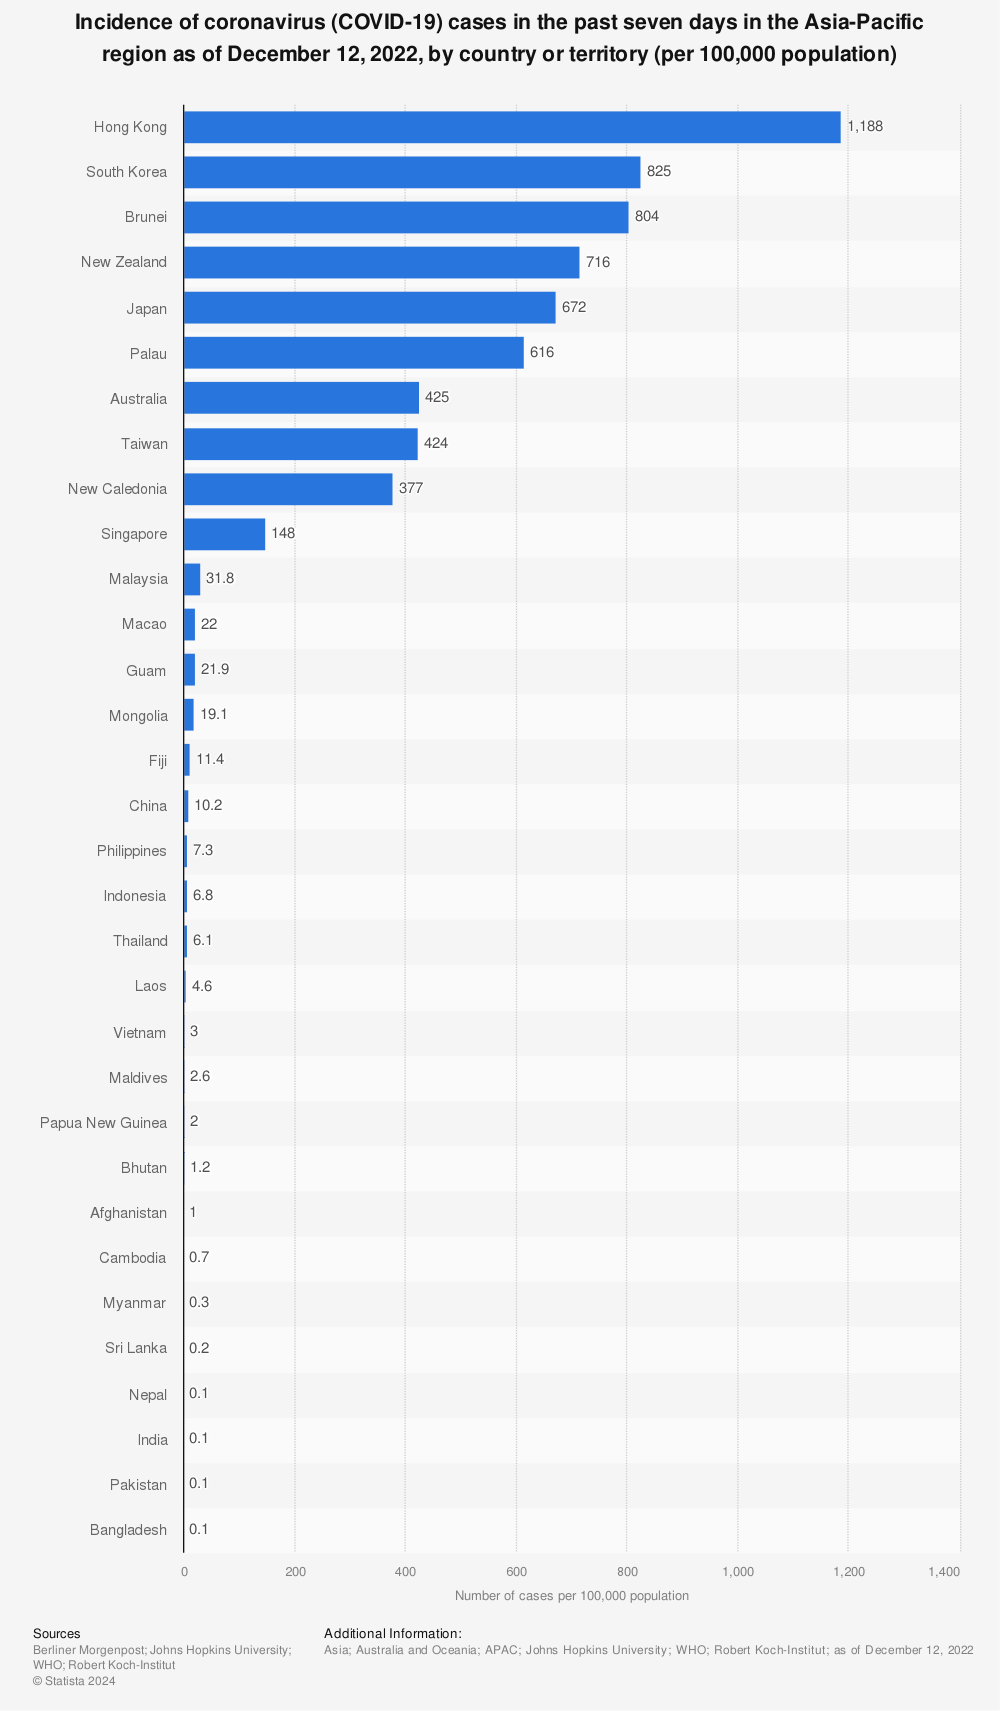 Statistic: Incidence of coronavirus (COVID-19) cases in the past seven days in the Asia-Pacific region as of March 26, 2022, by country or region (per 100,000 population) | Statista